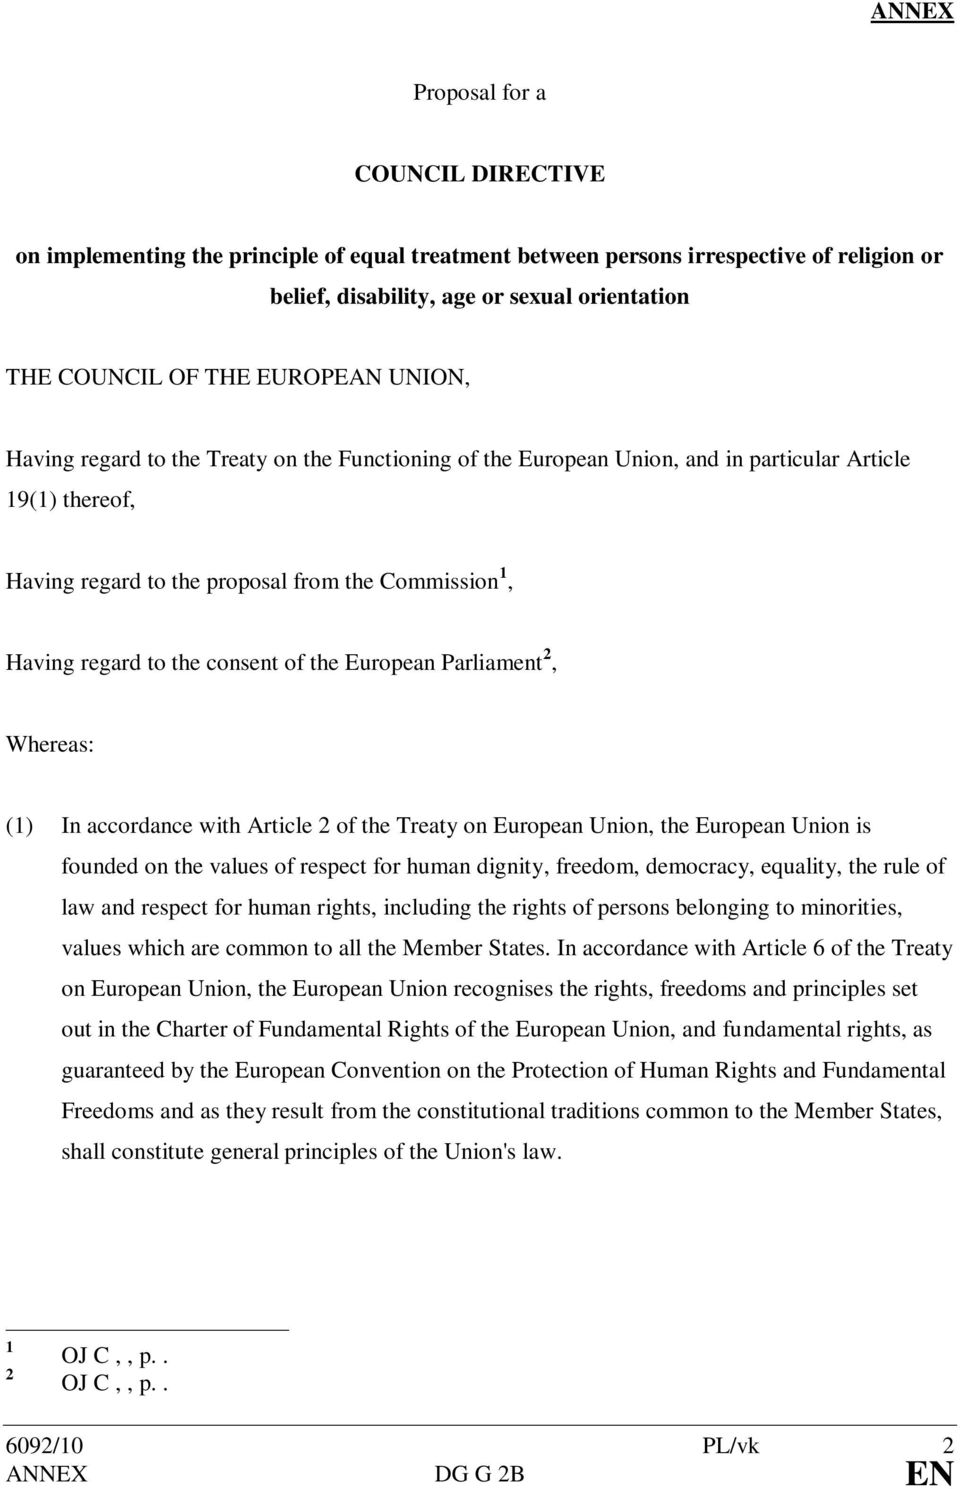 the consent of the European Parliament 2, Whereas: (1) In accordance with Article 2 of the Treaty on European Union, the European Union is founded on the values of respect for human dignity, freedom,